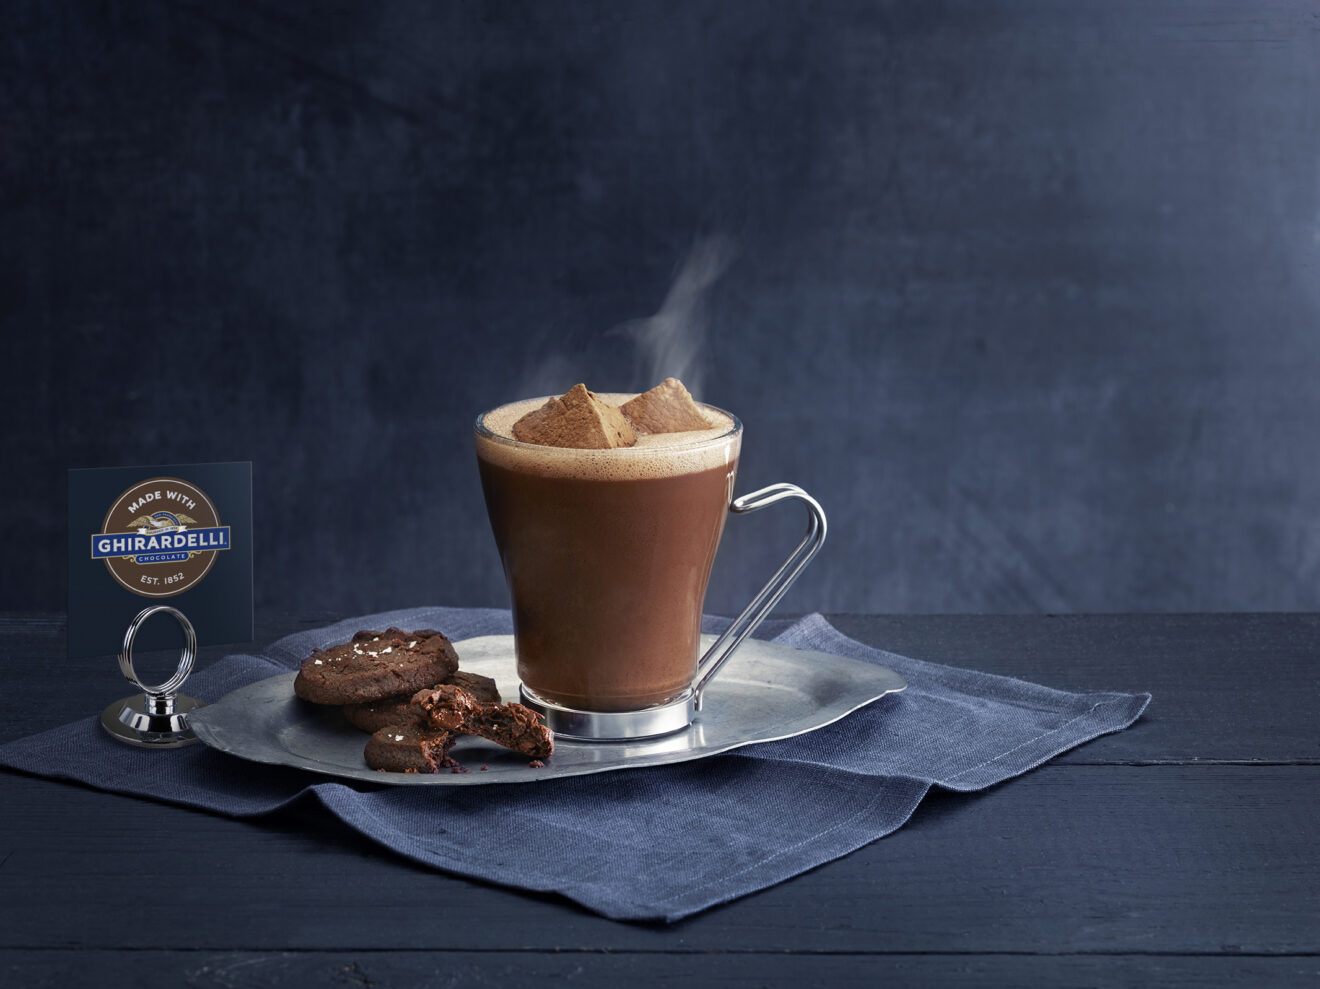 Technomic: Ghirardelli can give foodservice operators a substantial boost to their image and sweeten sales